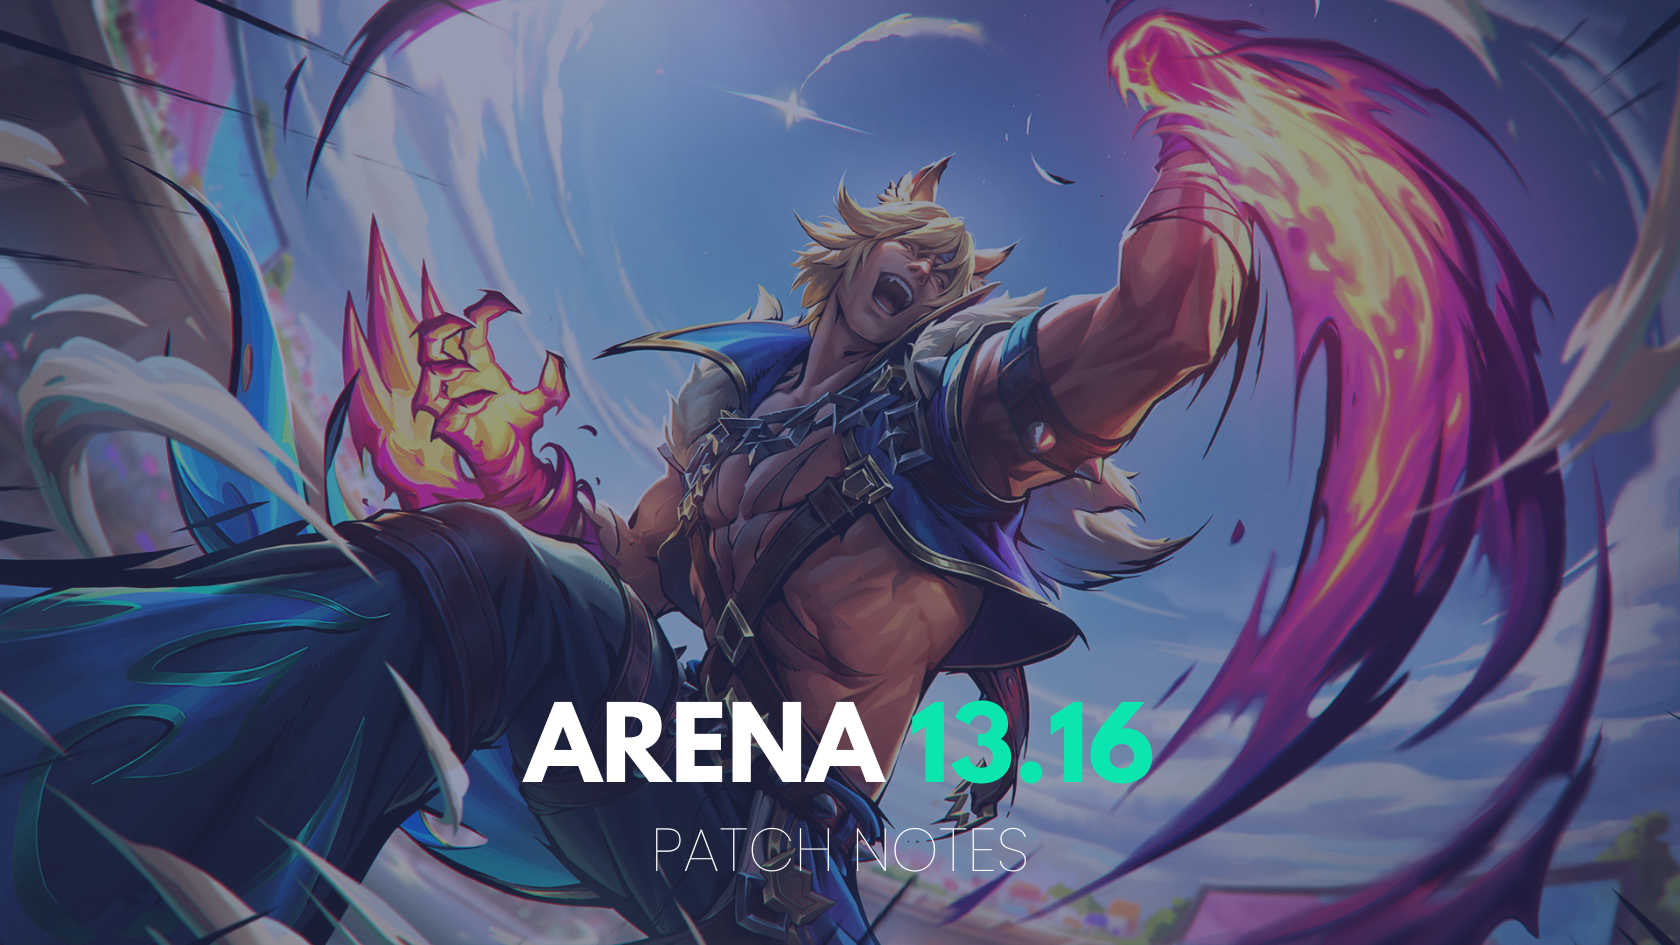 lol arena patch notes 13.16